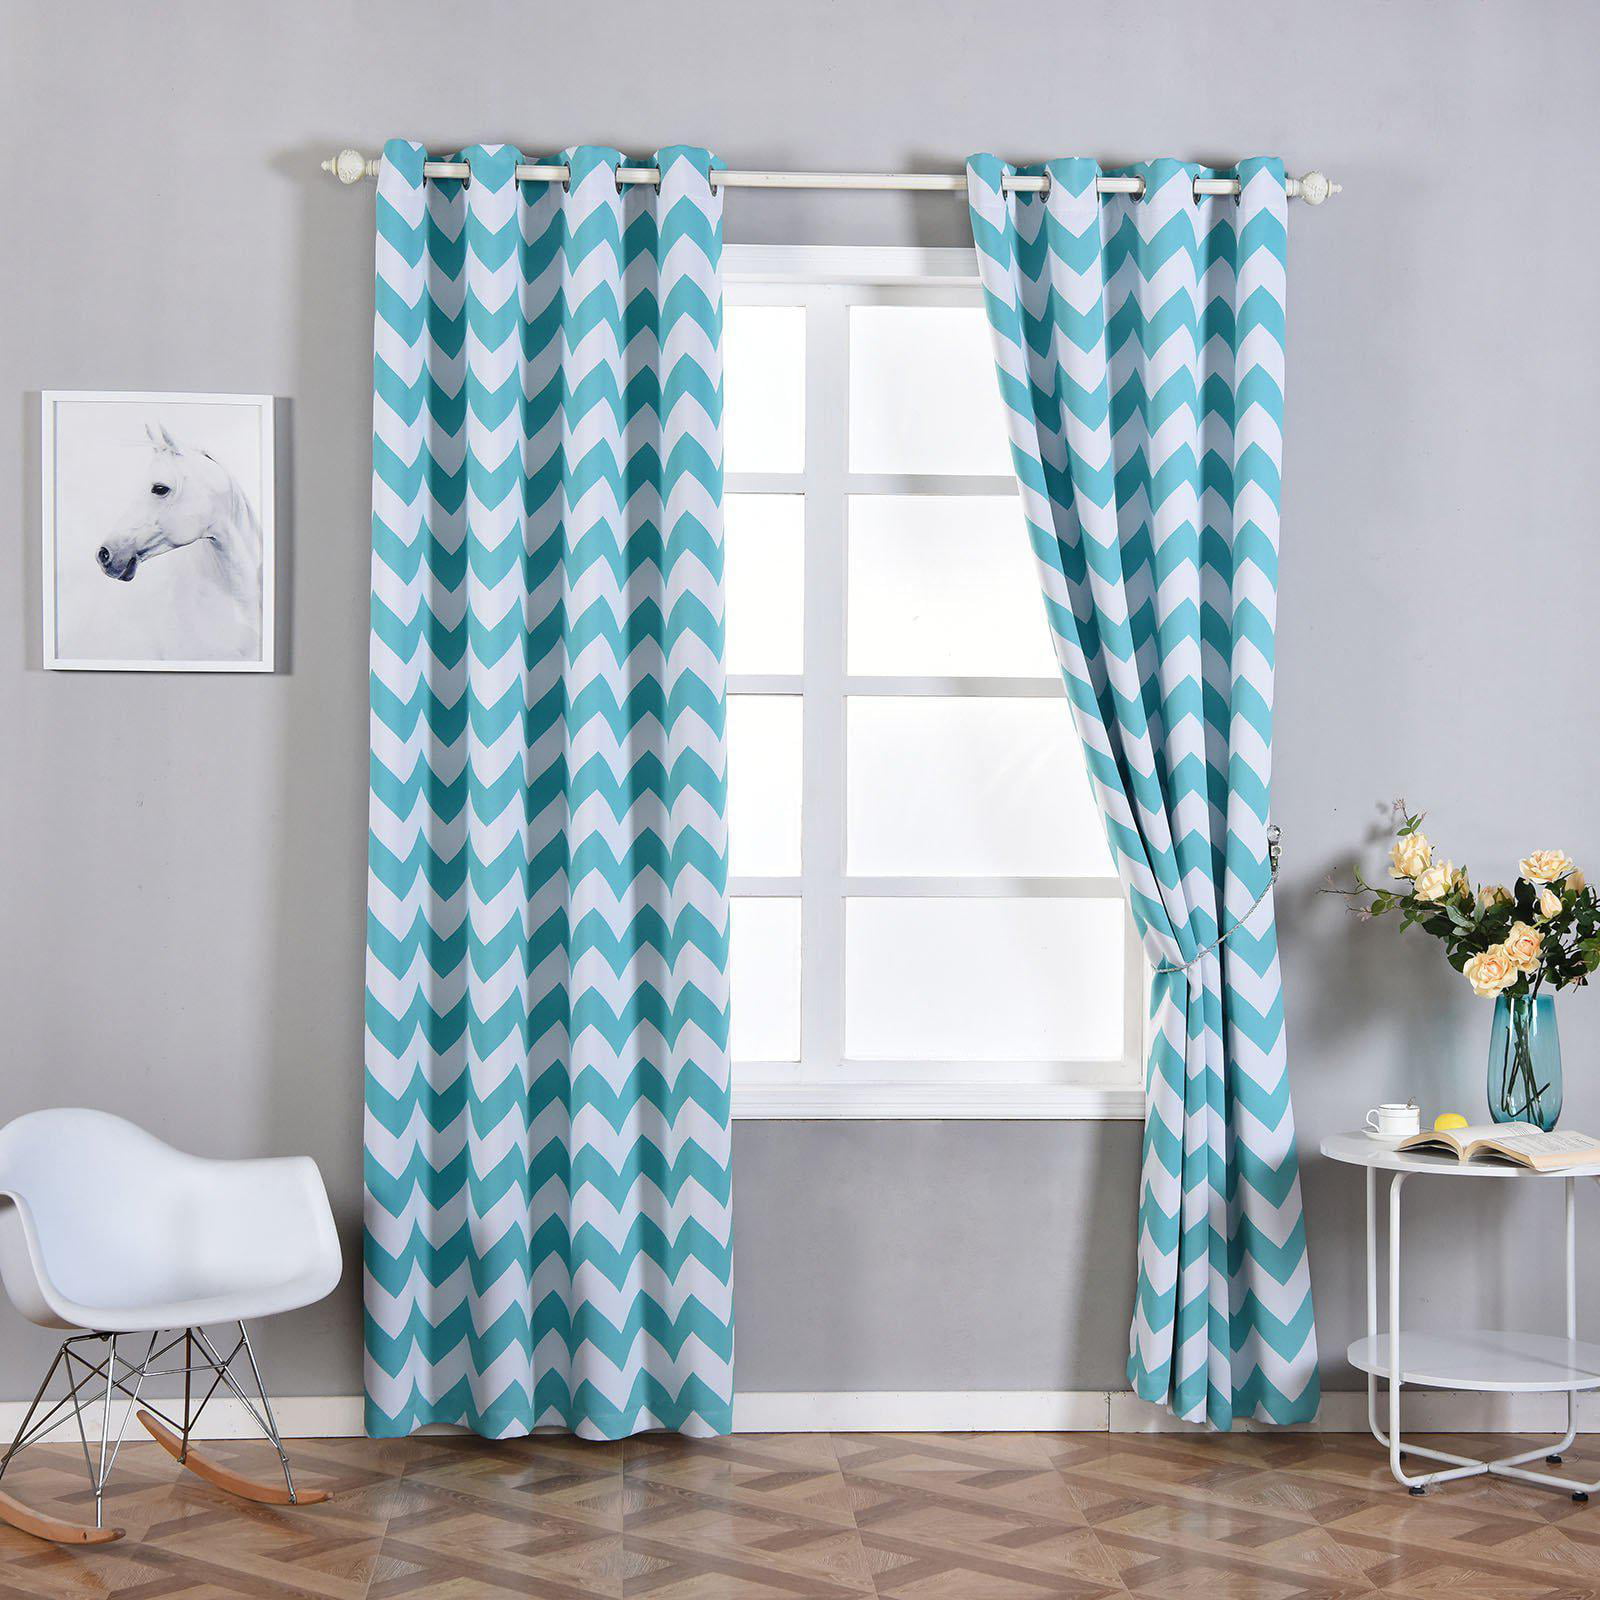 2 pcs Turquoise 52" x 96" Polyester Blackout Window CURTAINS Drapes Panels Home 